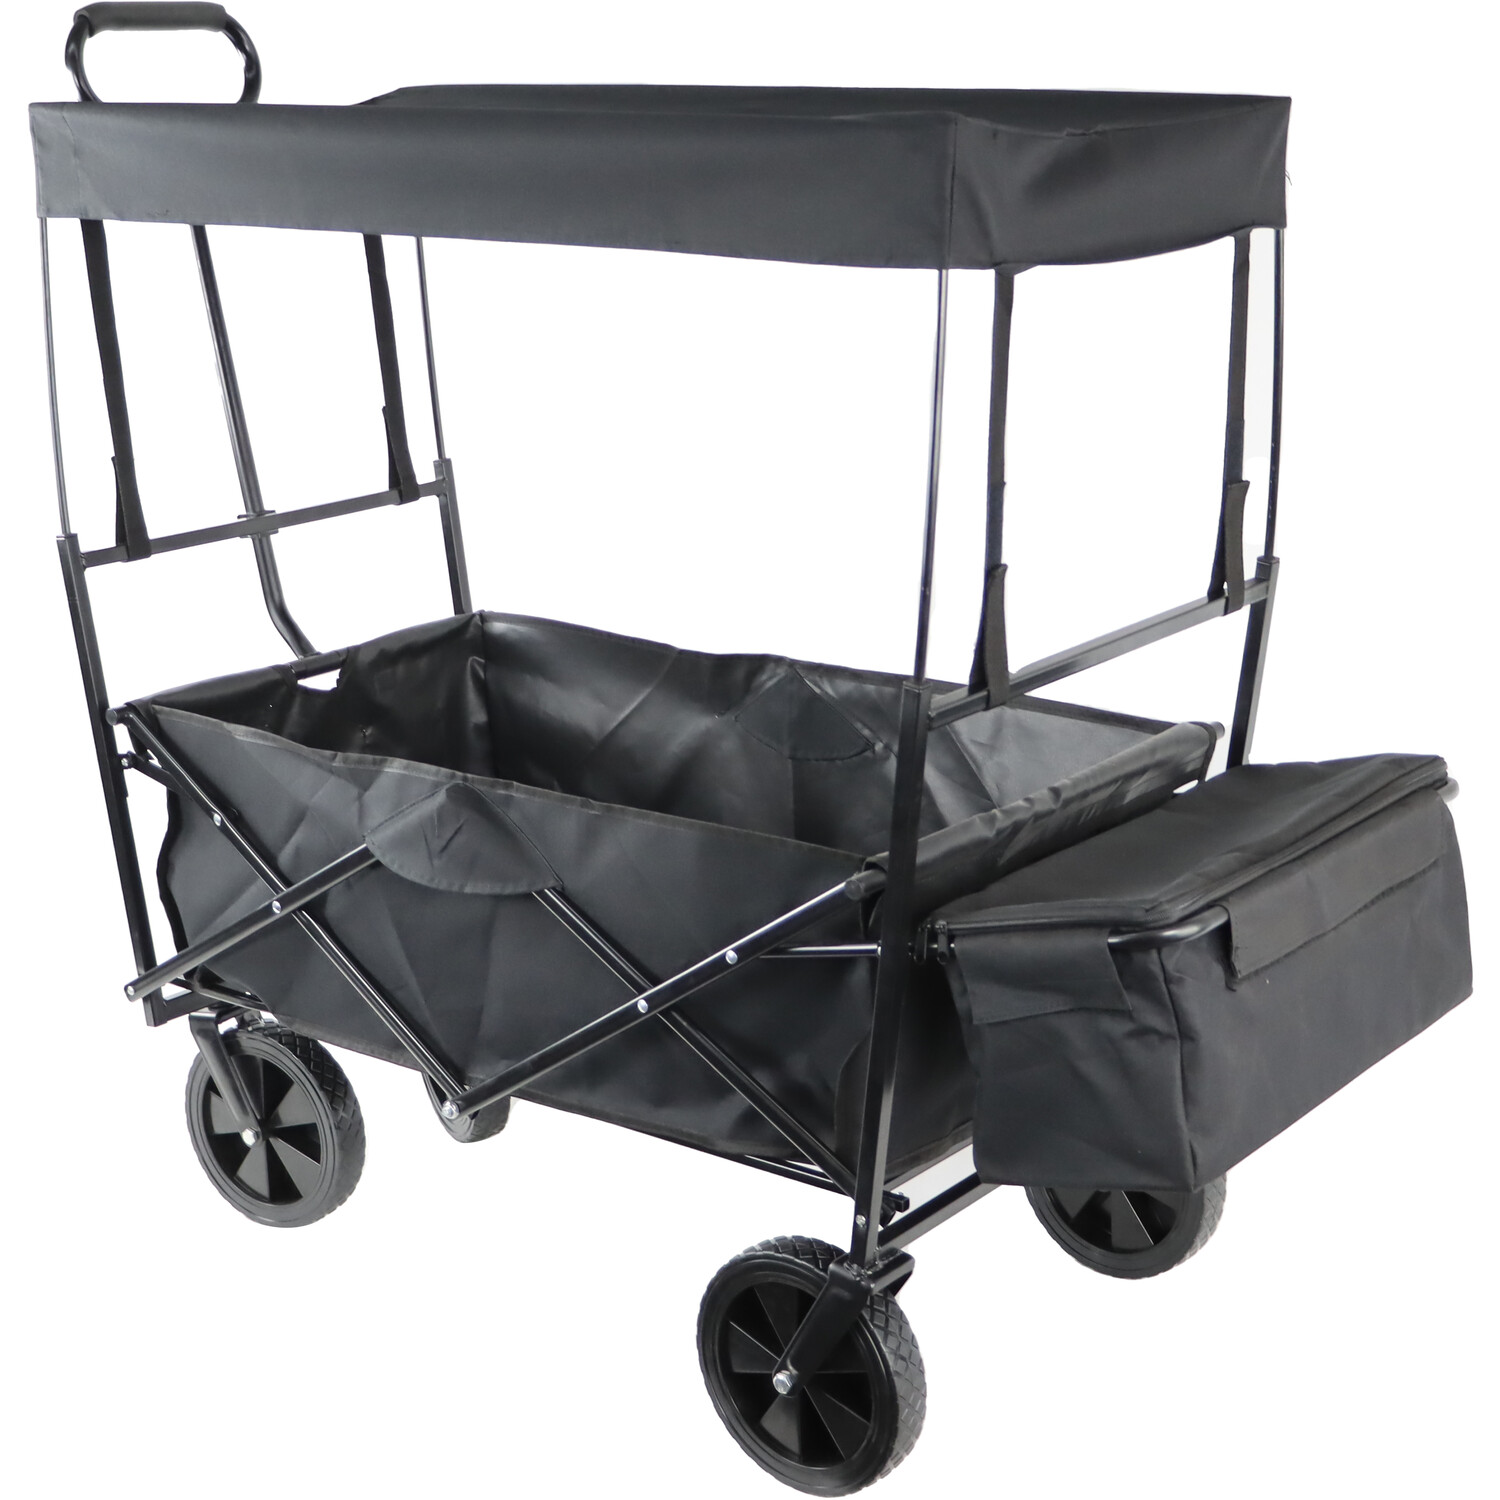 Foldable Trolley with Canopy - Black Image 2